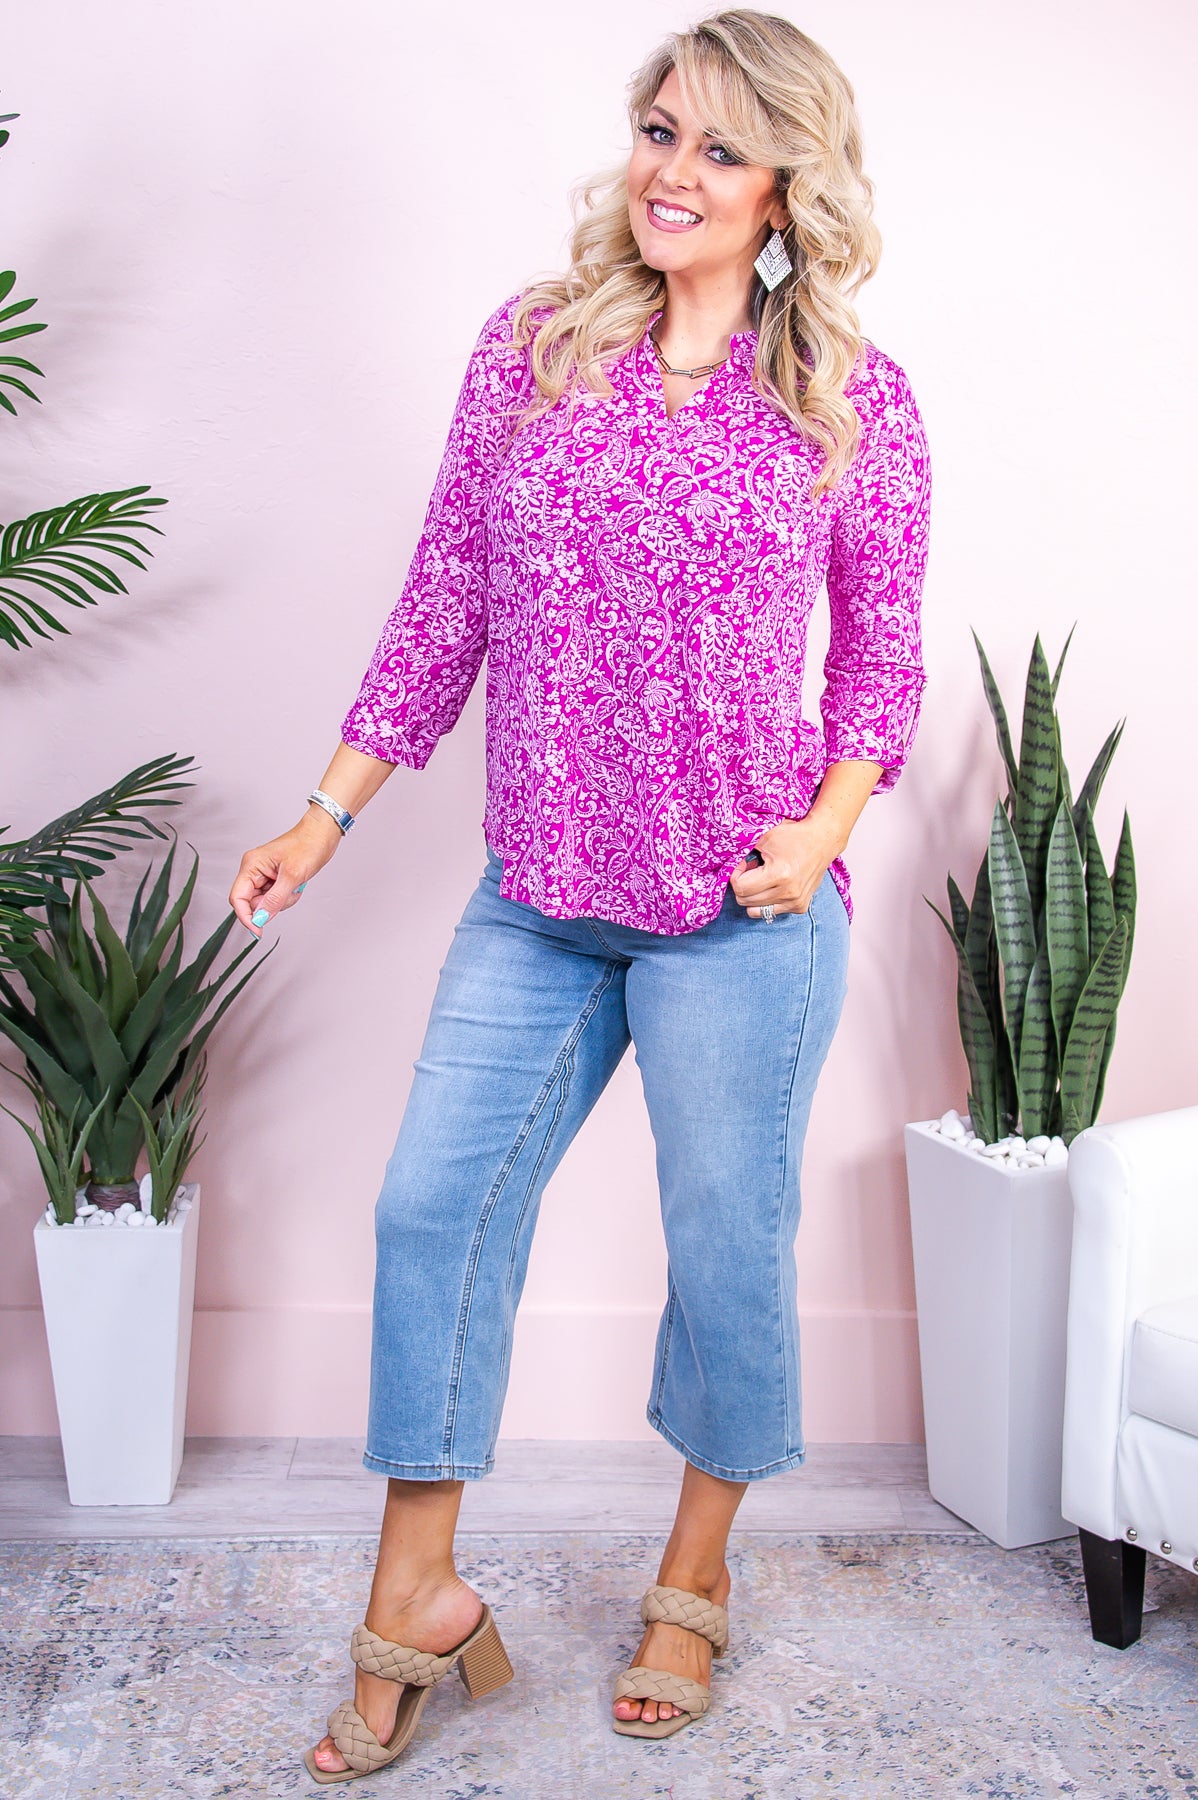 Find Balance In Life Magenta/Light pink Paisley Top - T9480MG